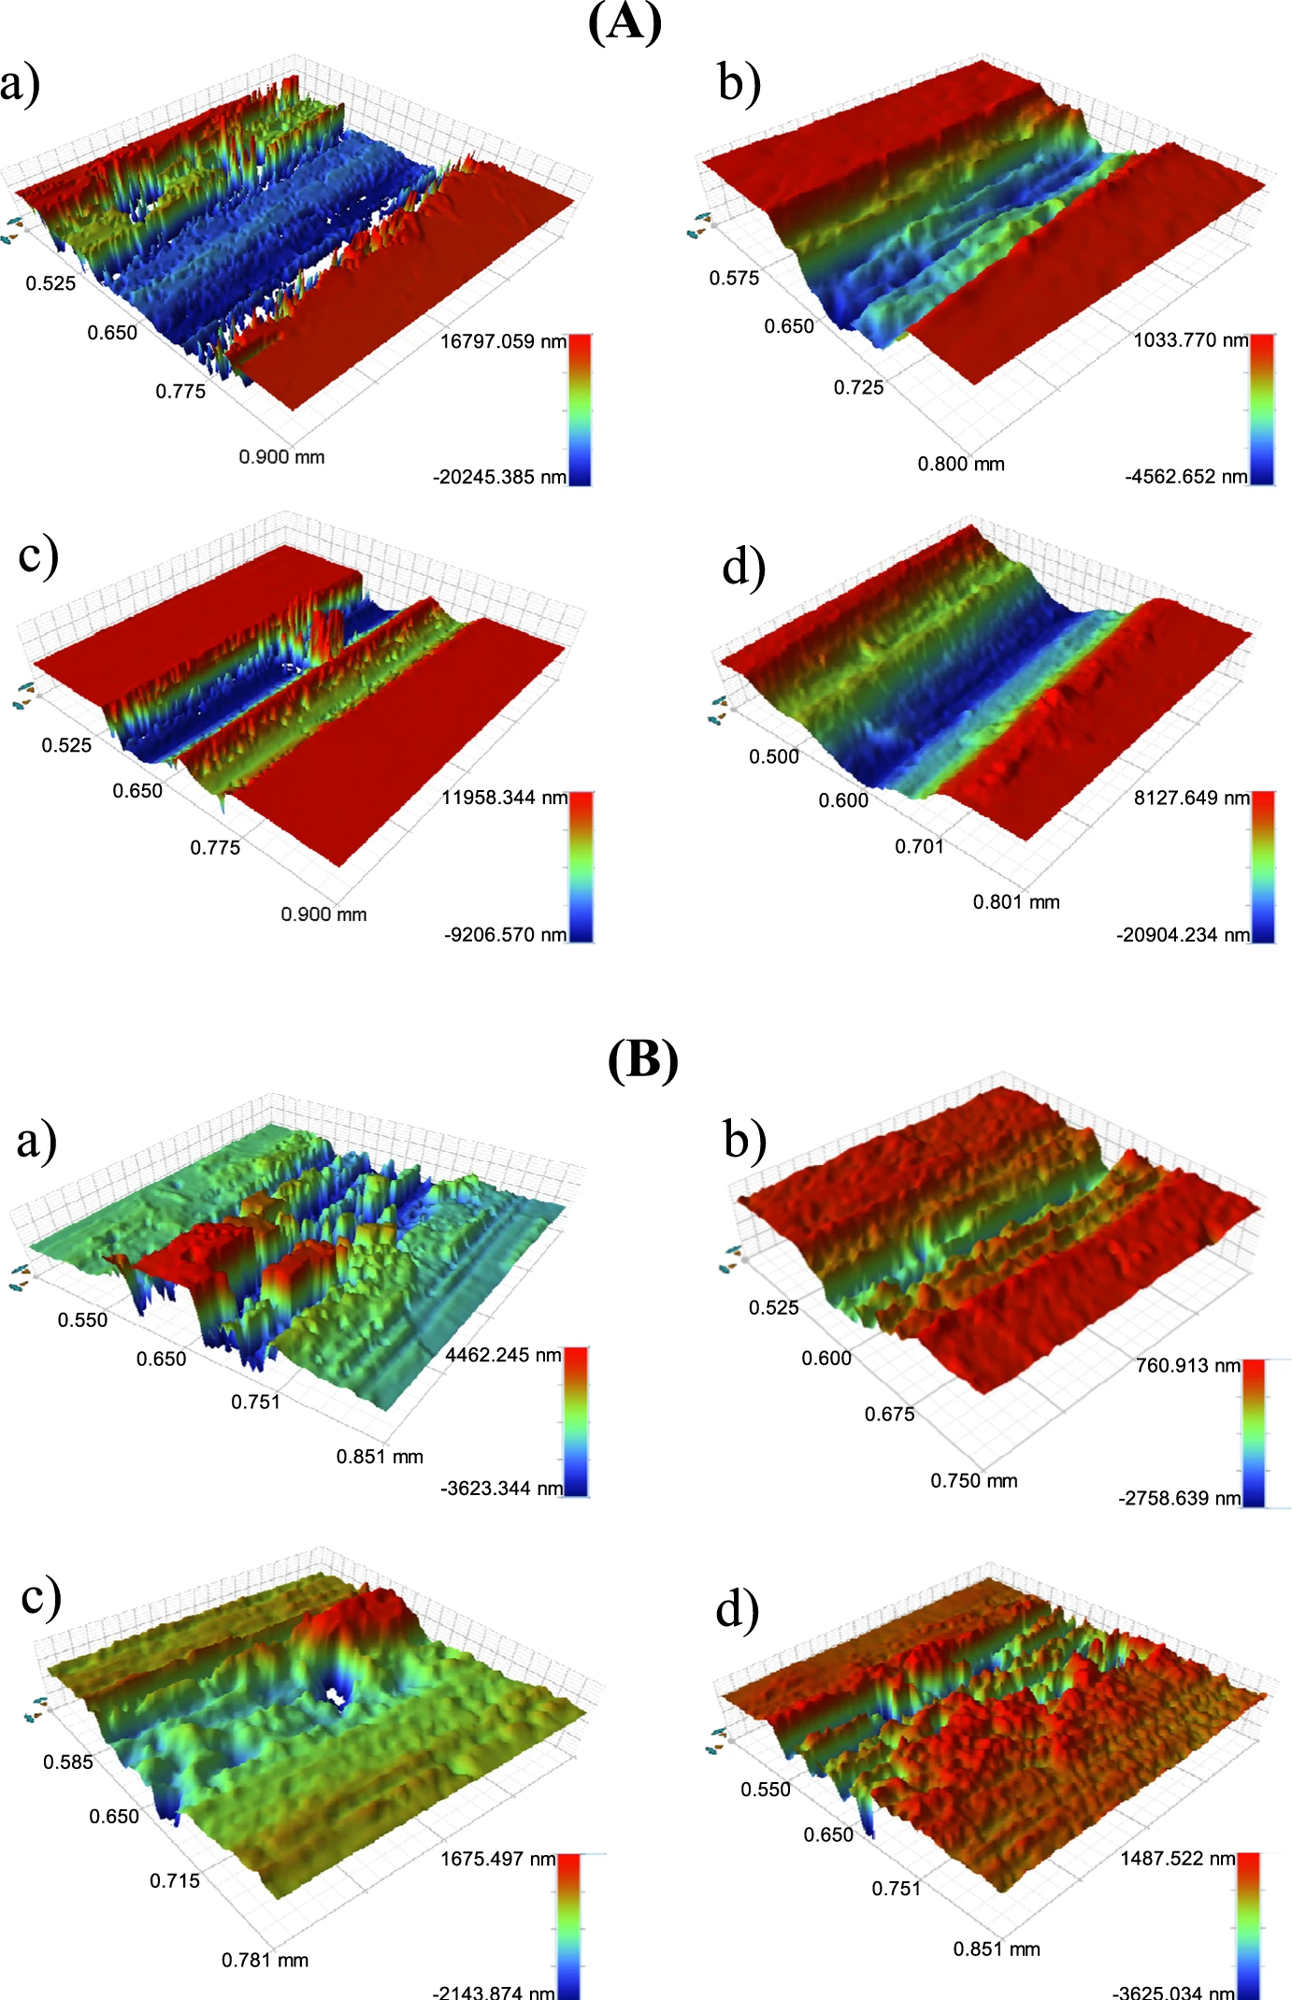 (A) Surface topographies of wear tracks tested under dry sliding condition: (a) pure Zn; (b) Zn-0.5Li; (c) Zn-1Cu; and (d) Zn-1Ge; (B) Surface topographies of wear tracks tested under Hanks’ solution condition: (a) Pure Zn; (b) Zn-0.5Li; (c) Zn-1Cu; and (d) Zn-1Ge.